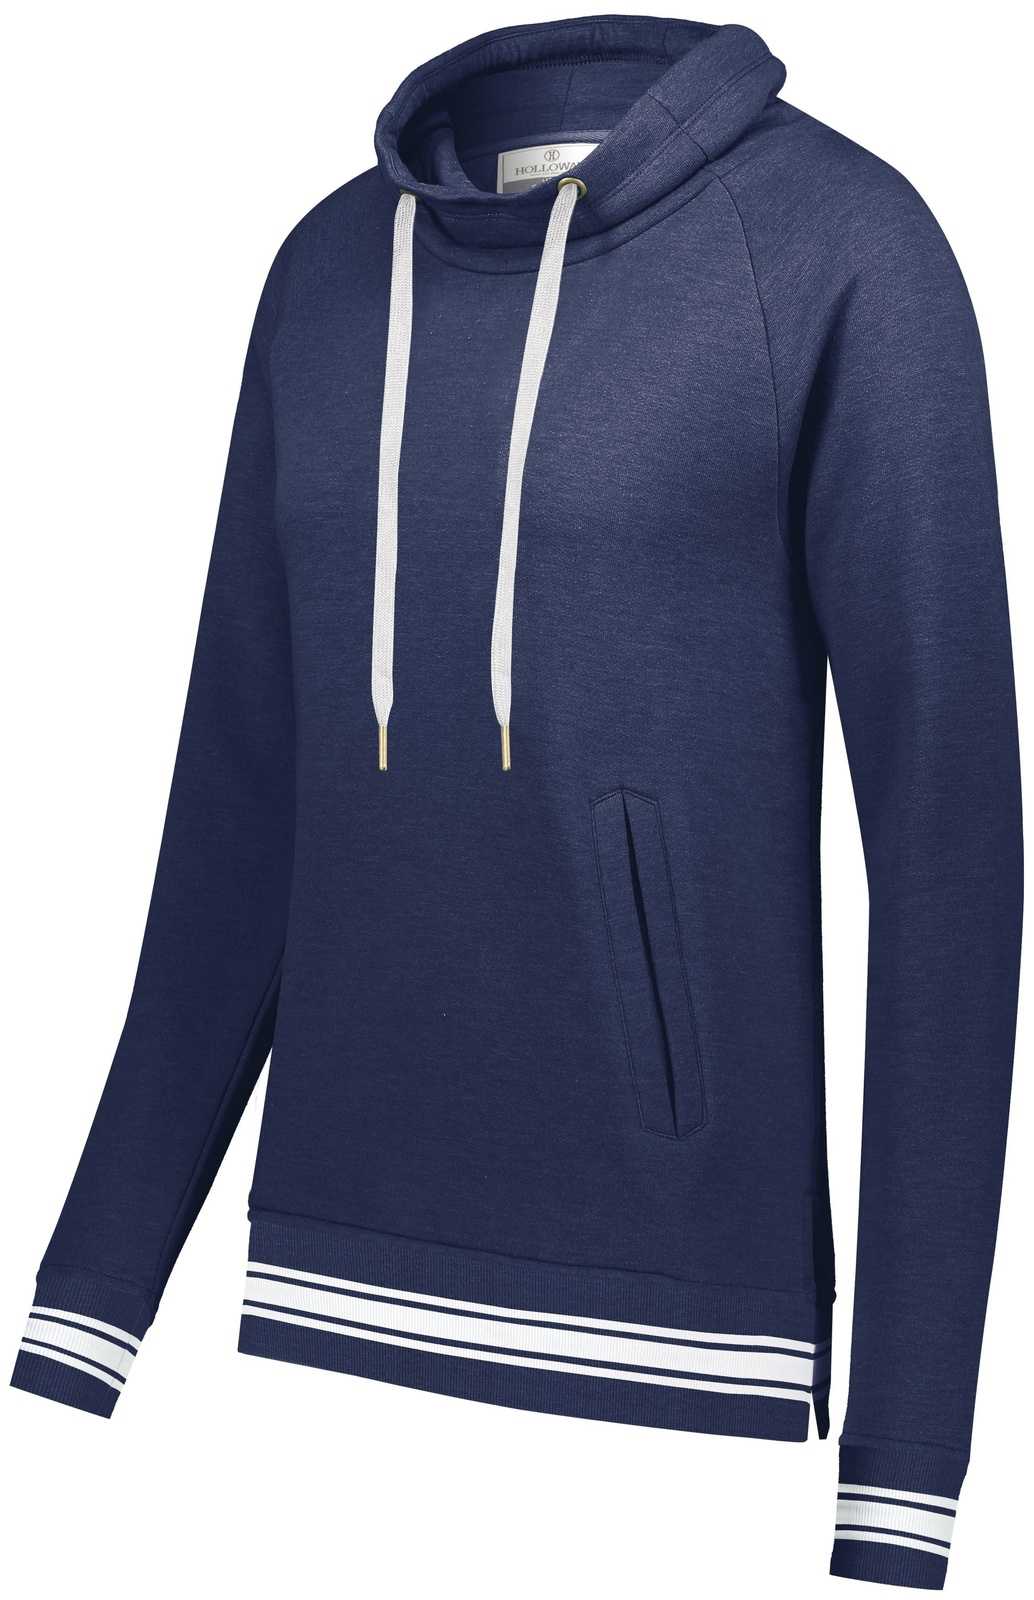 Holloway 229763 Ladies Ivy League Funnel Neck Pullover - Navy Heather White - HIT a Double